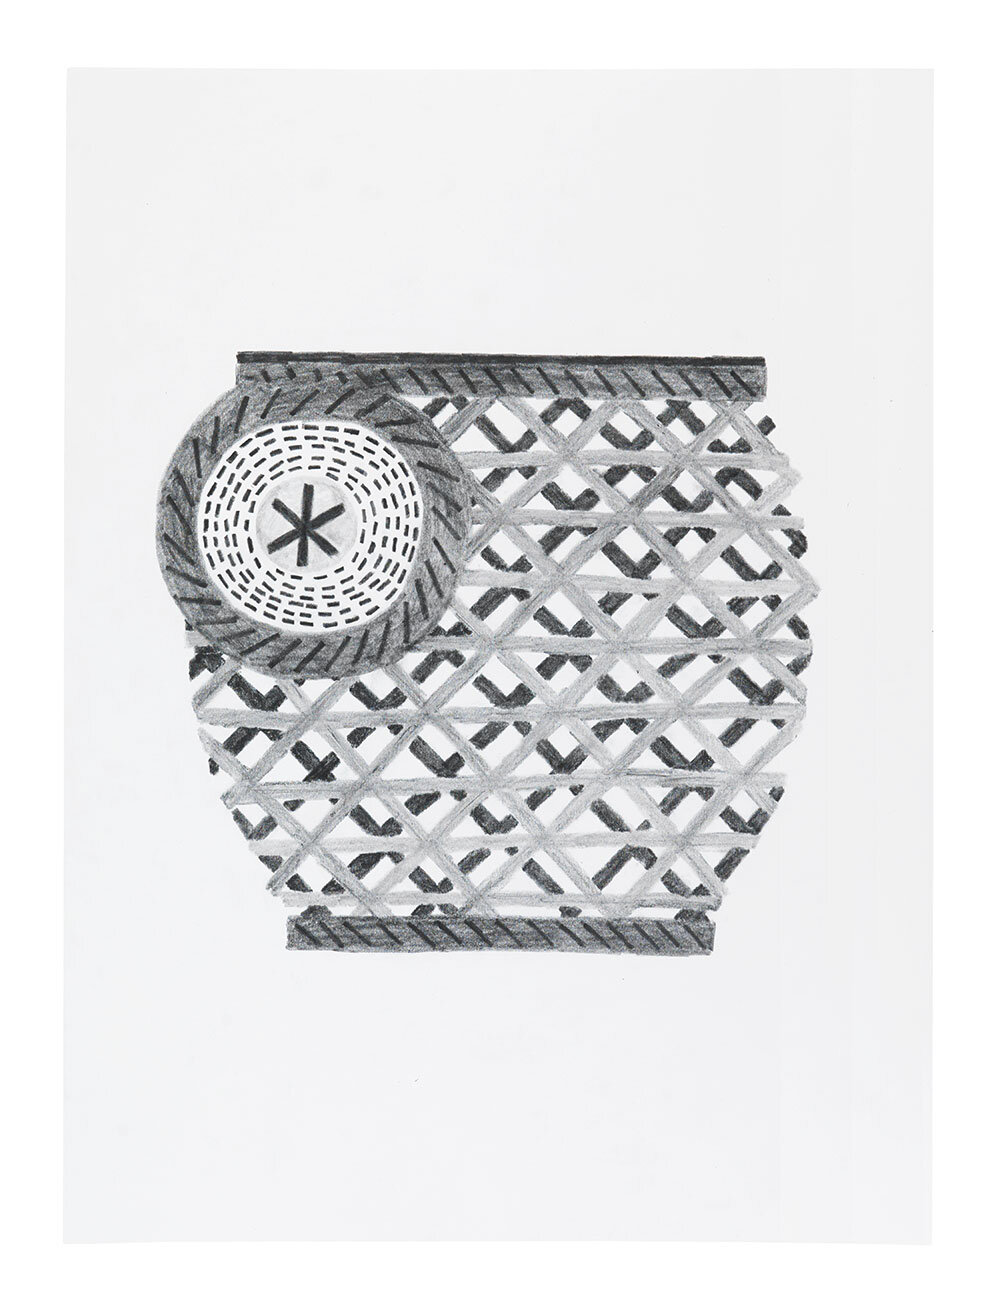   Cross Weave Basket with Lid   Graphite on paper 22 x 30 inches    